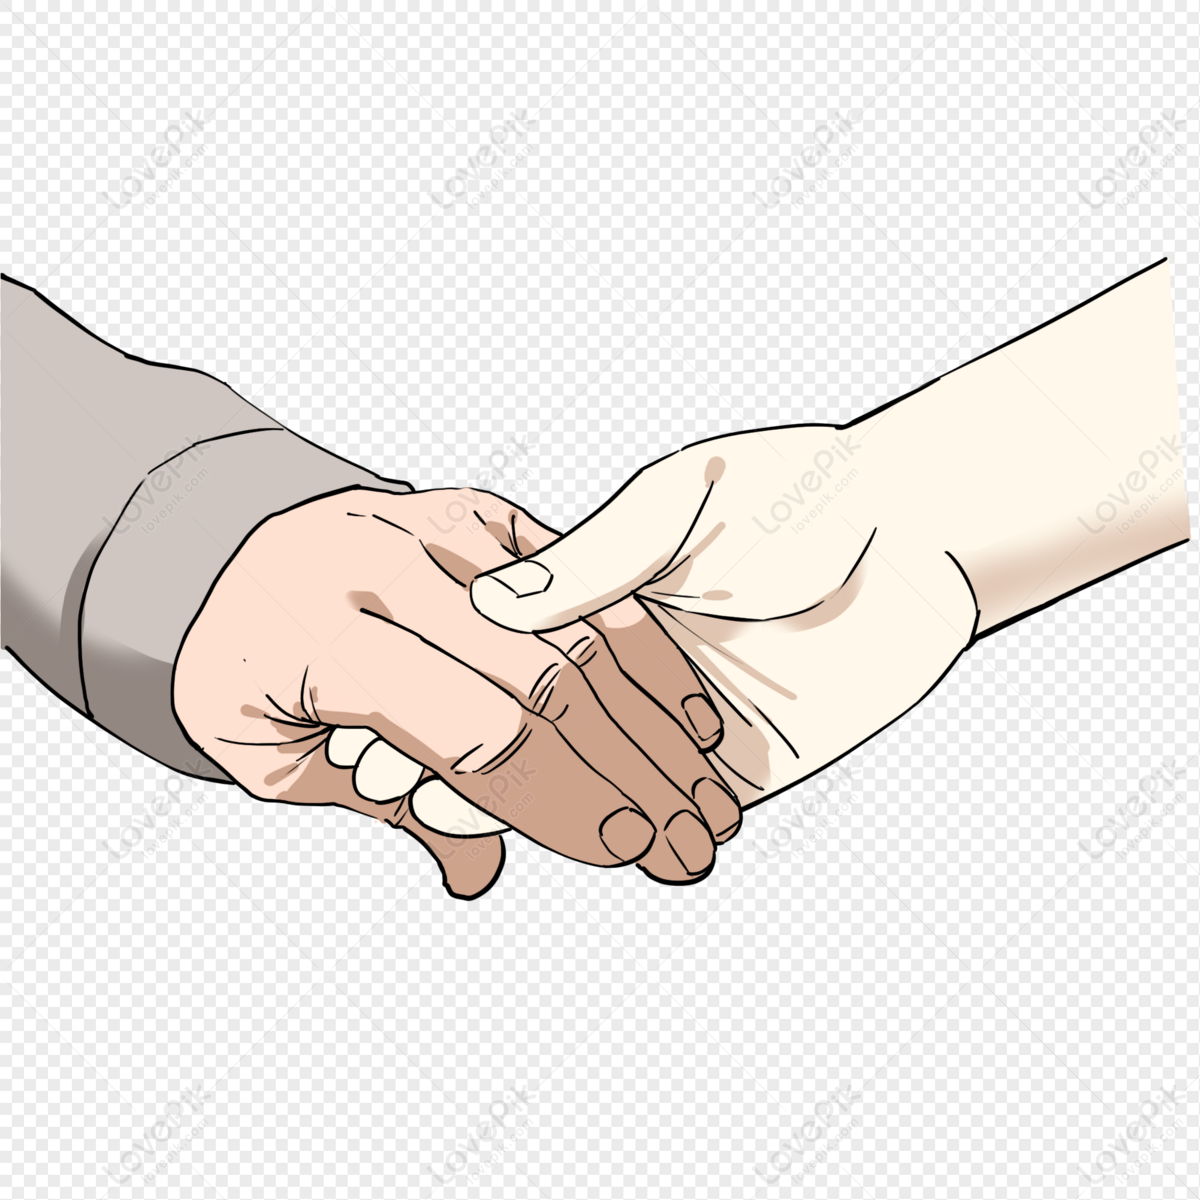 Hand Holding PNG Image, Big Hands Holding Small Hands, Big Hand